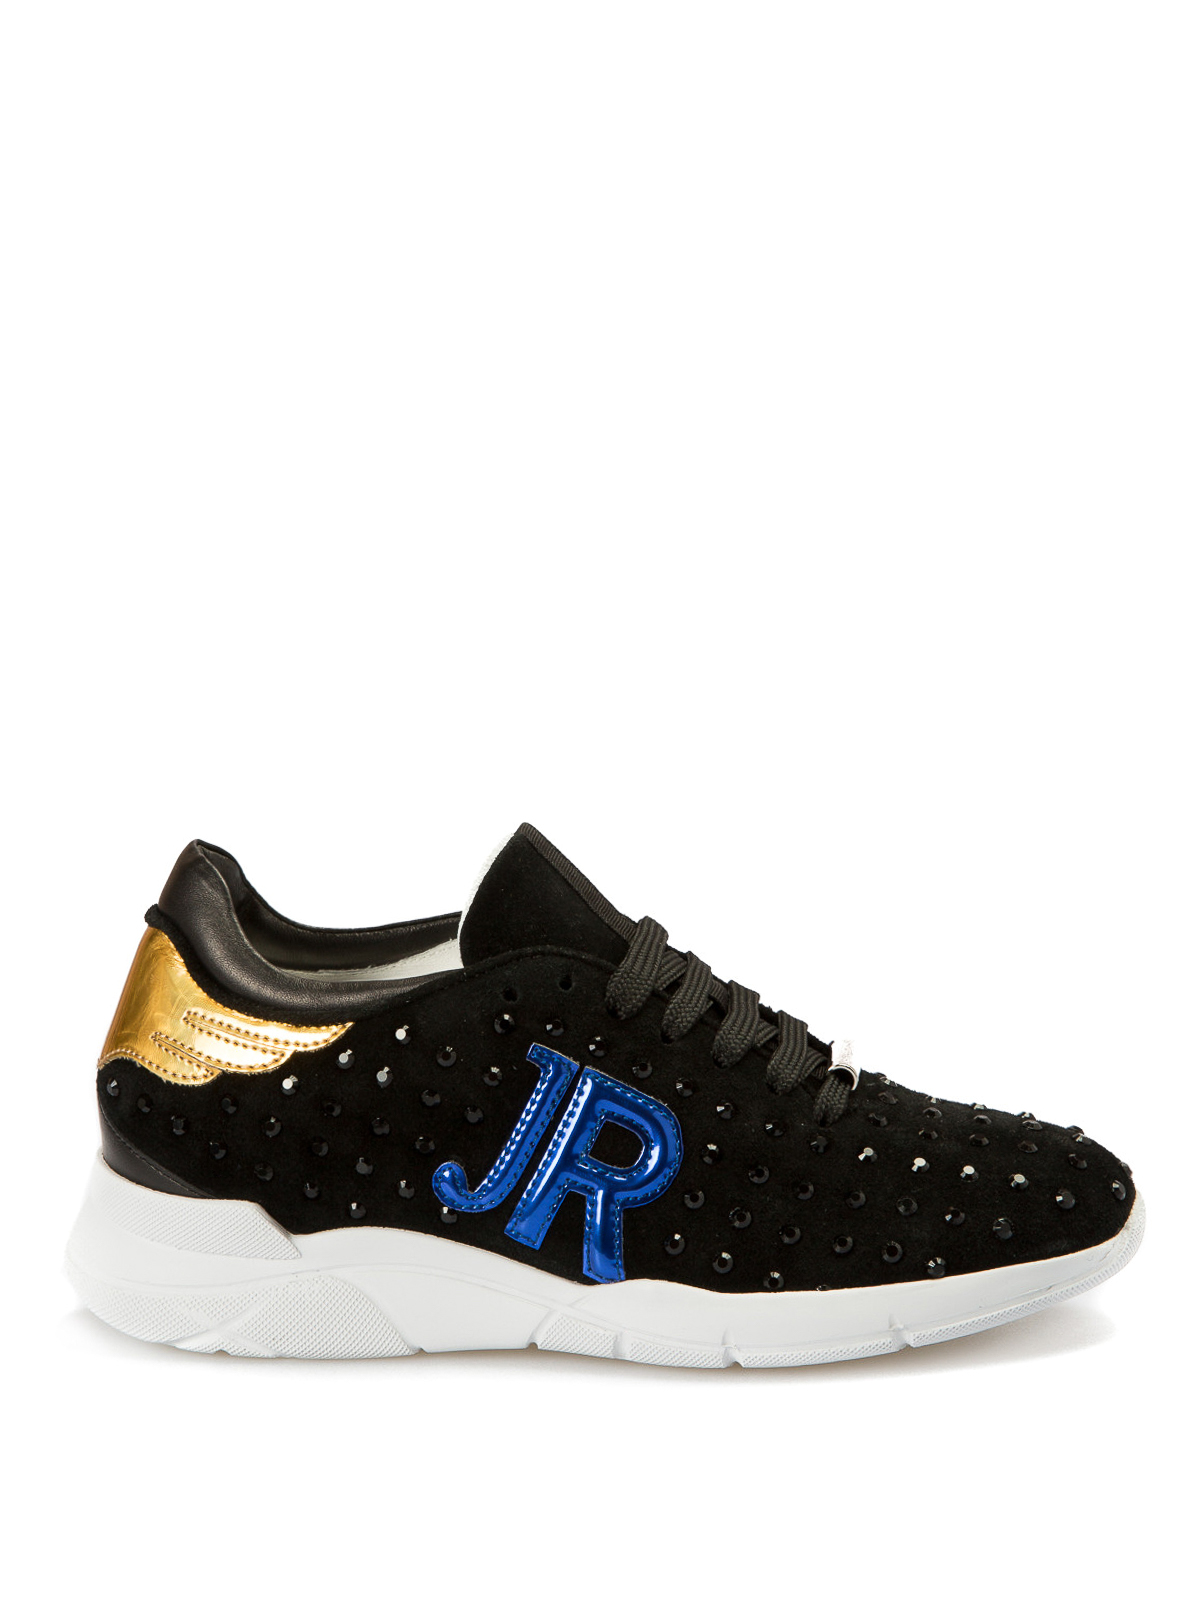 John Richmond - Studded running shoes - trainers ...